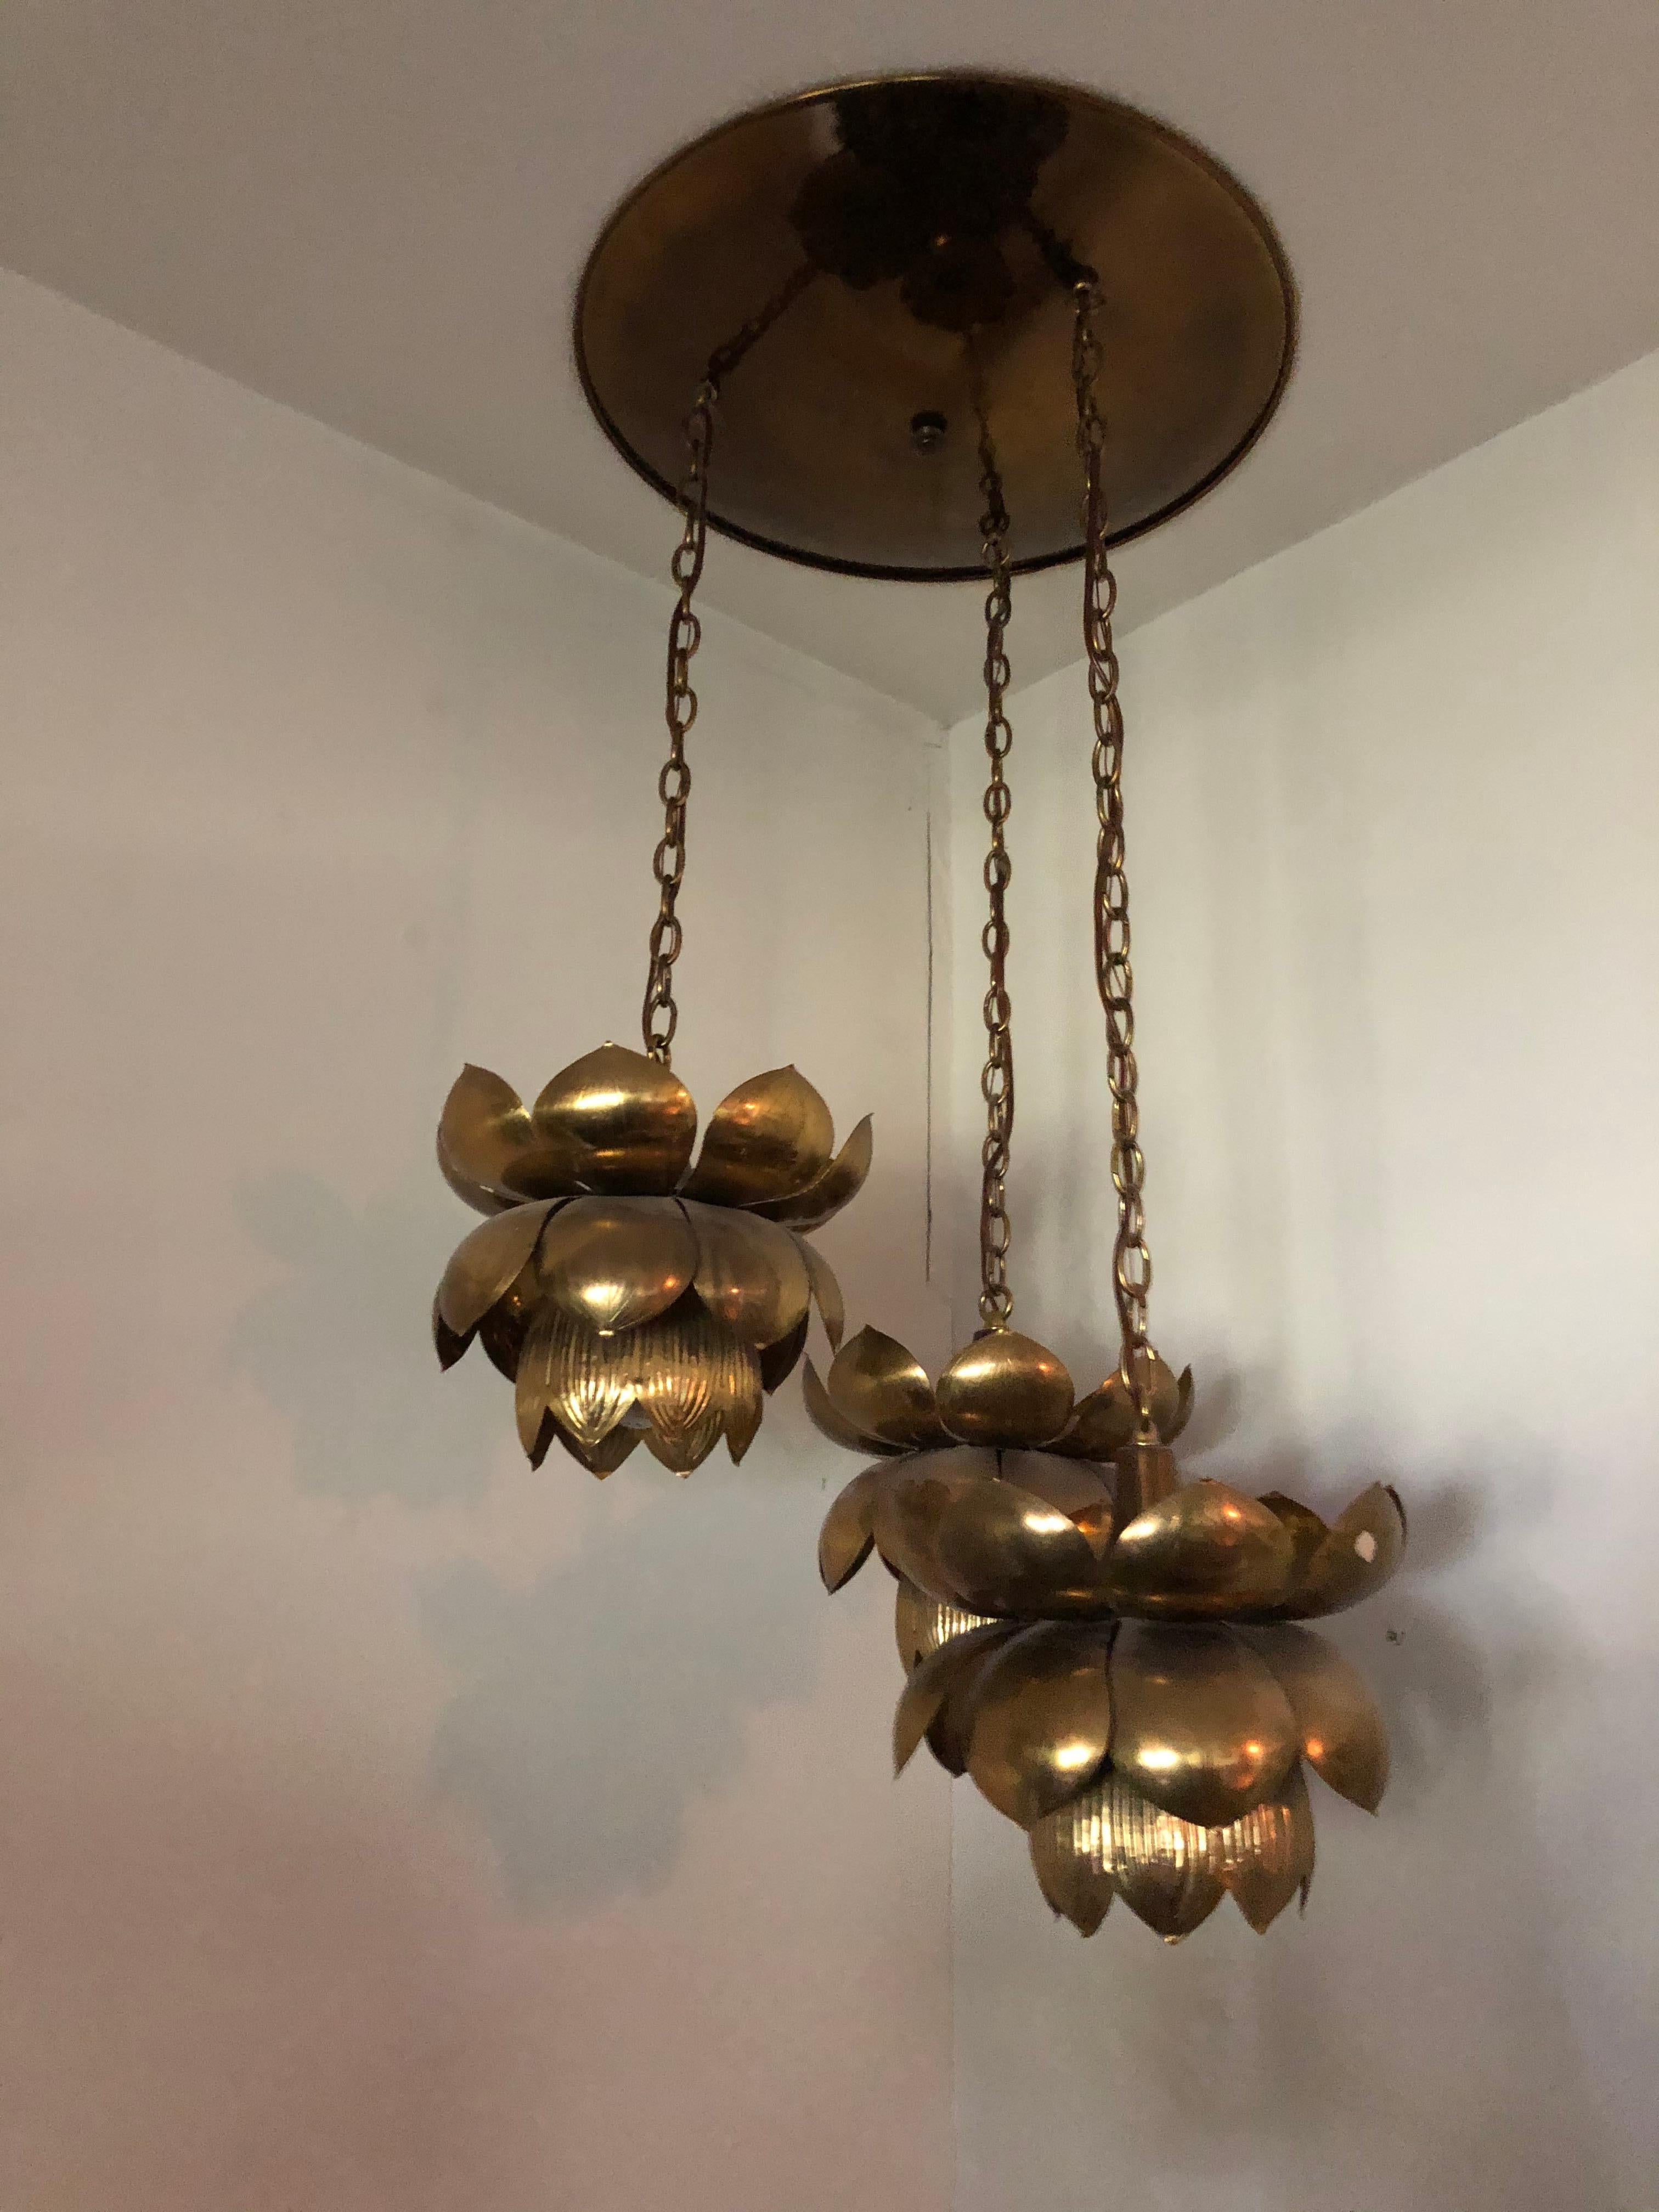 Fantastic trio of the iconic Feldman brass lotus chandelier pendants suspended at different lengths. The brass is etched with gentle ridges on each flower. Original disc ceiling cap included.

